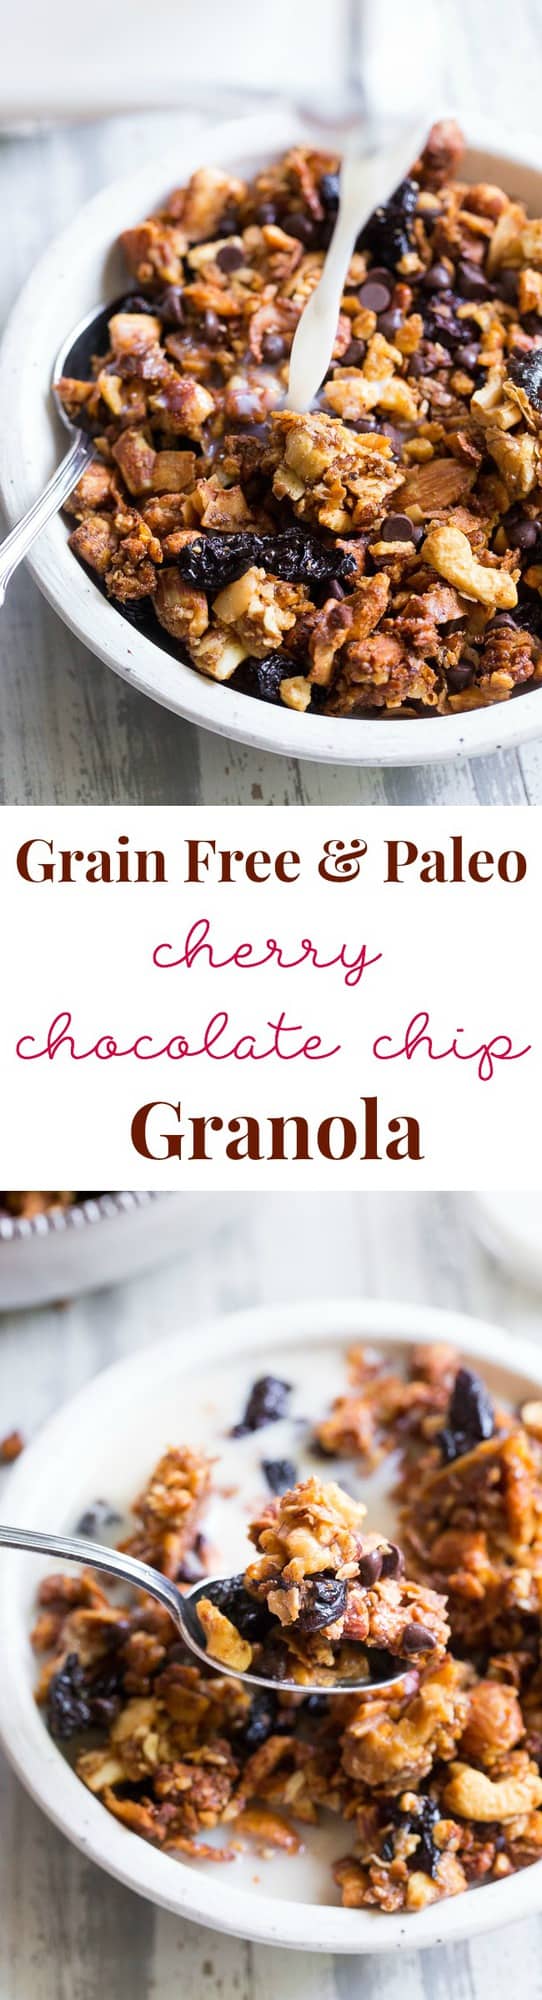 This crunchy paleo granola is loaded with goodies and so incredibly tasty!   Grain free granola clusters are baked with maple and tossed with sweet and tart dried cherries and dark chocolate chips.  It makes the perfect sweet snack or breakfast that everyone will love!  Gluten free, vegan, paleo.